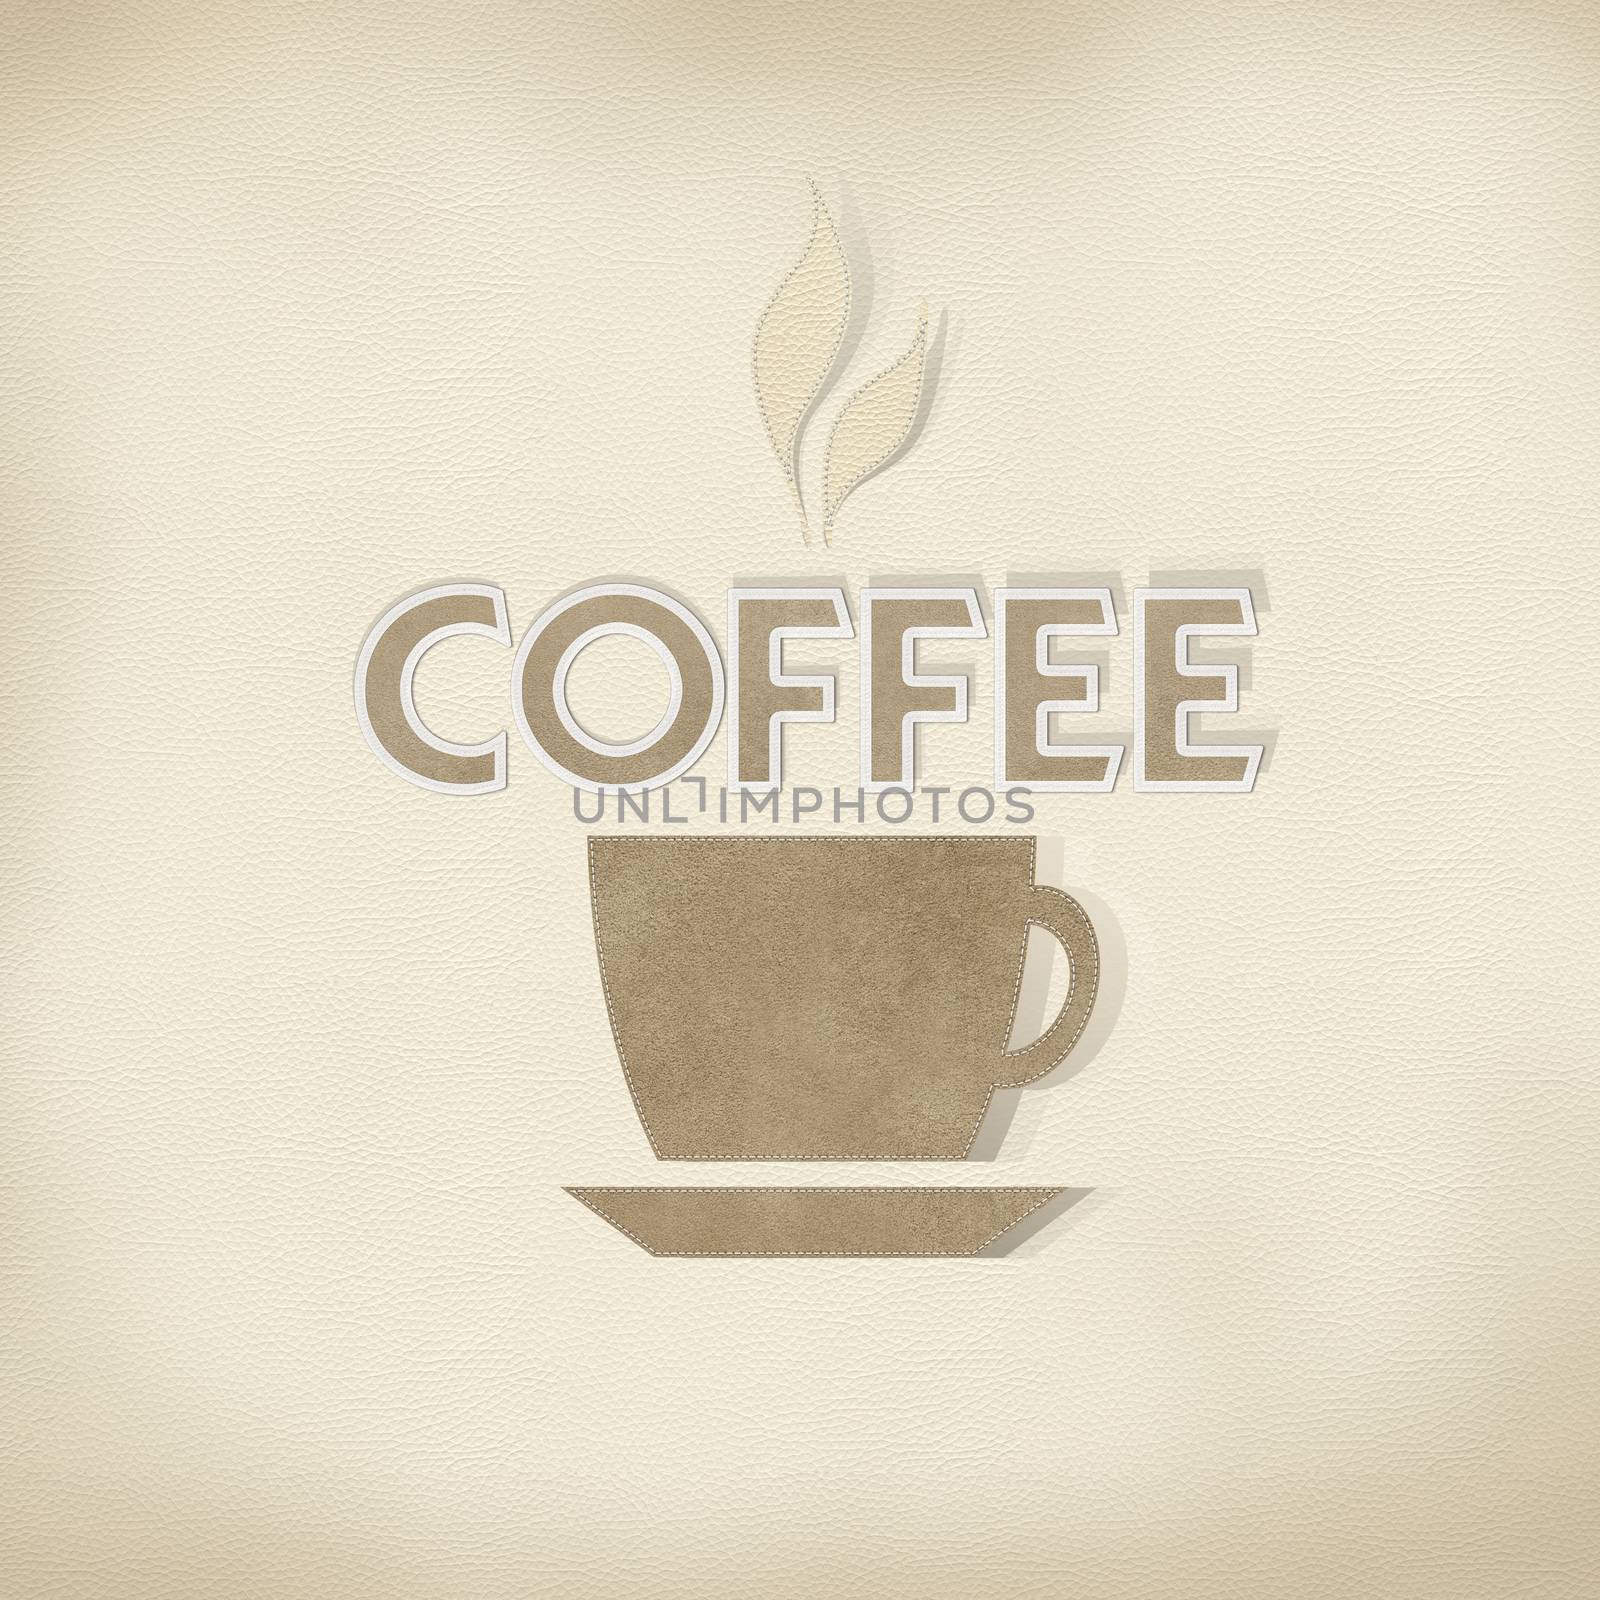 Coffee with stitch style on leather background by basketman23